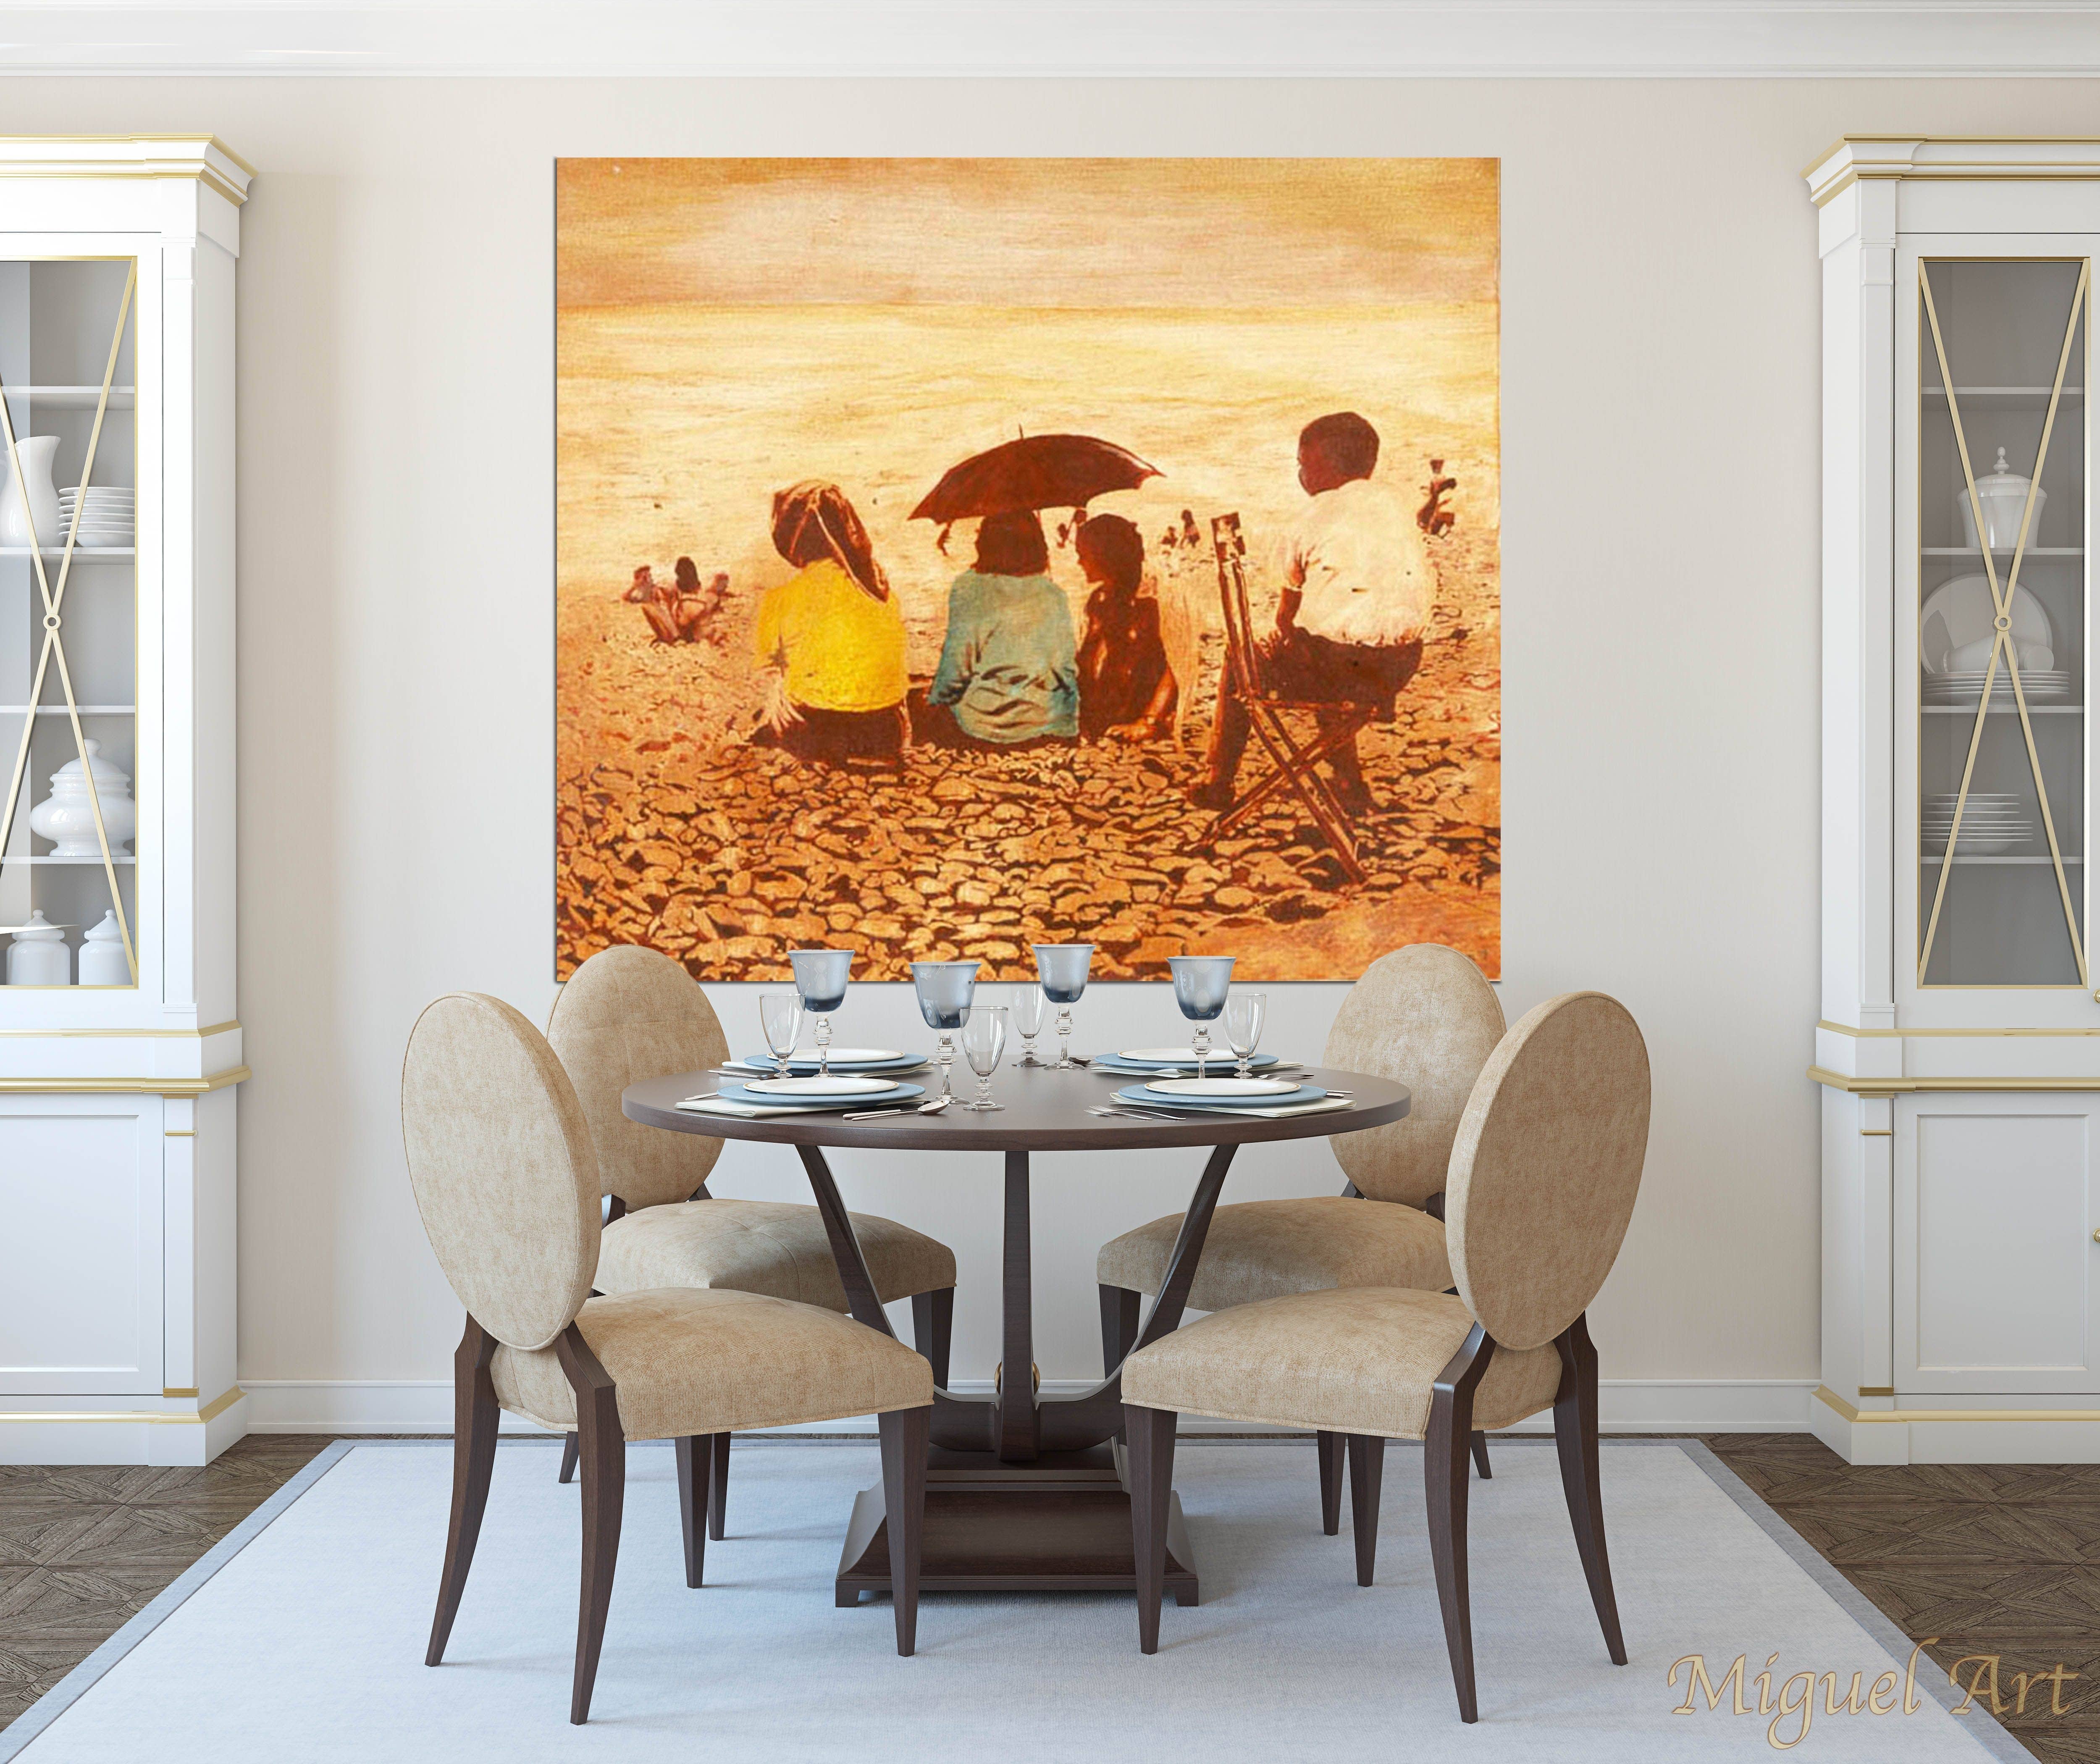 Painting of Sunset displayed in a dining room on a cream wall